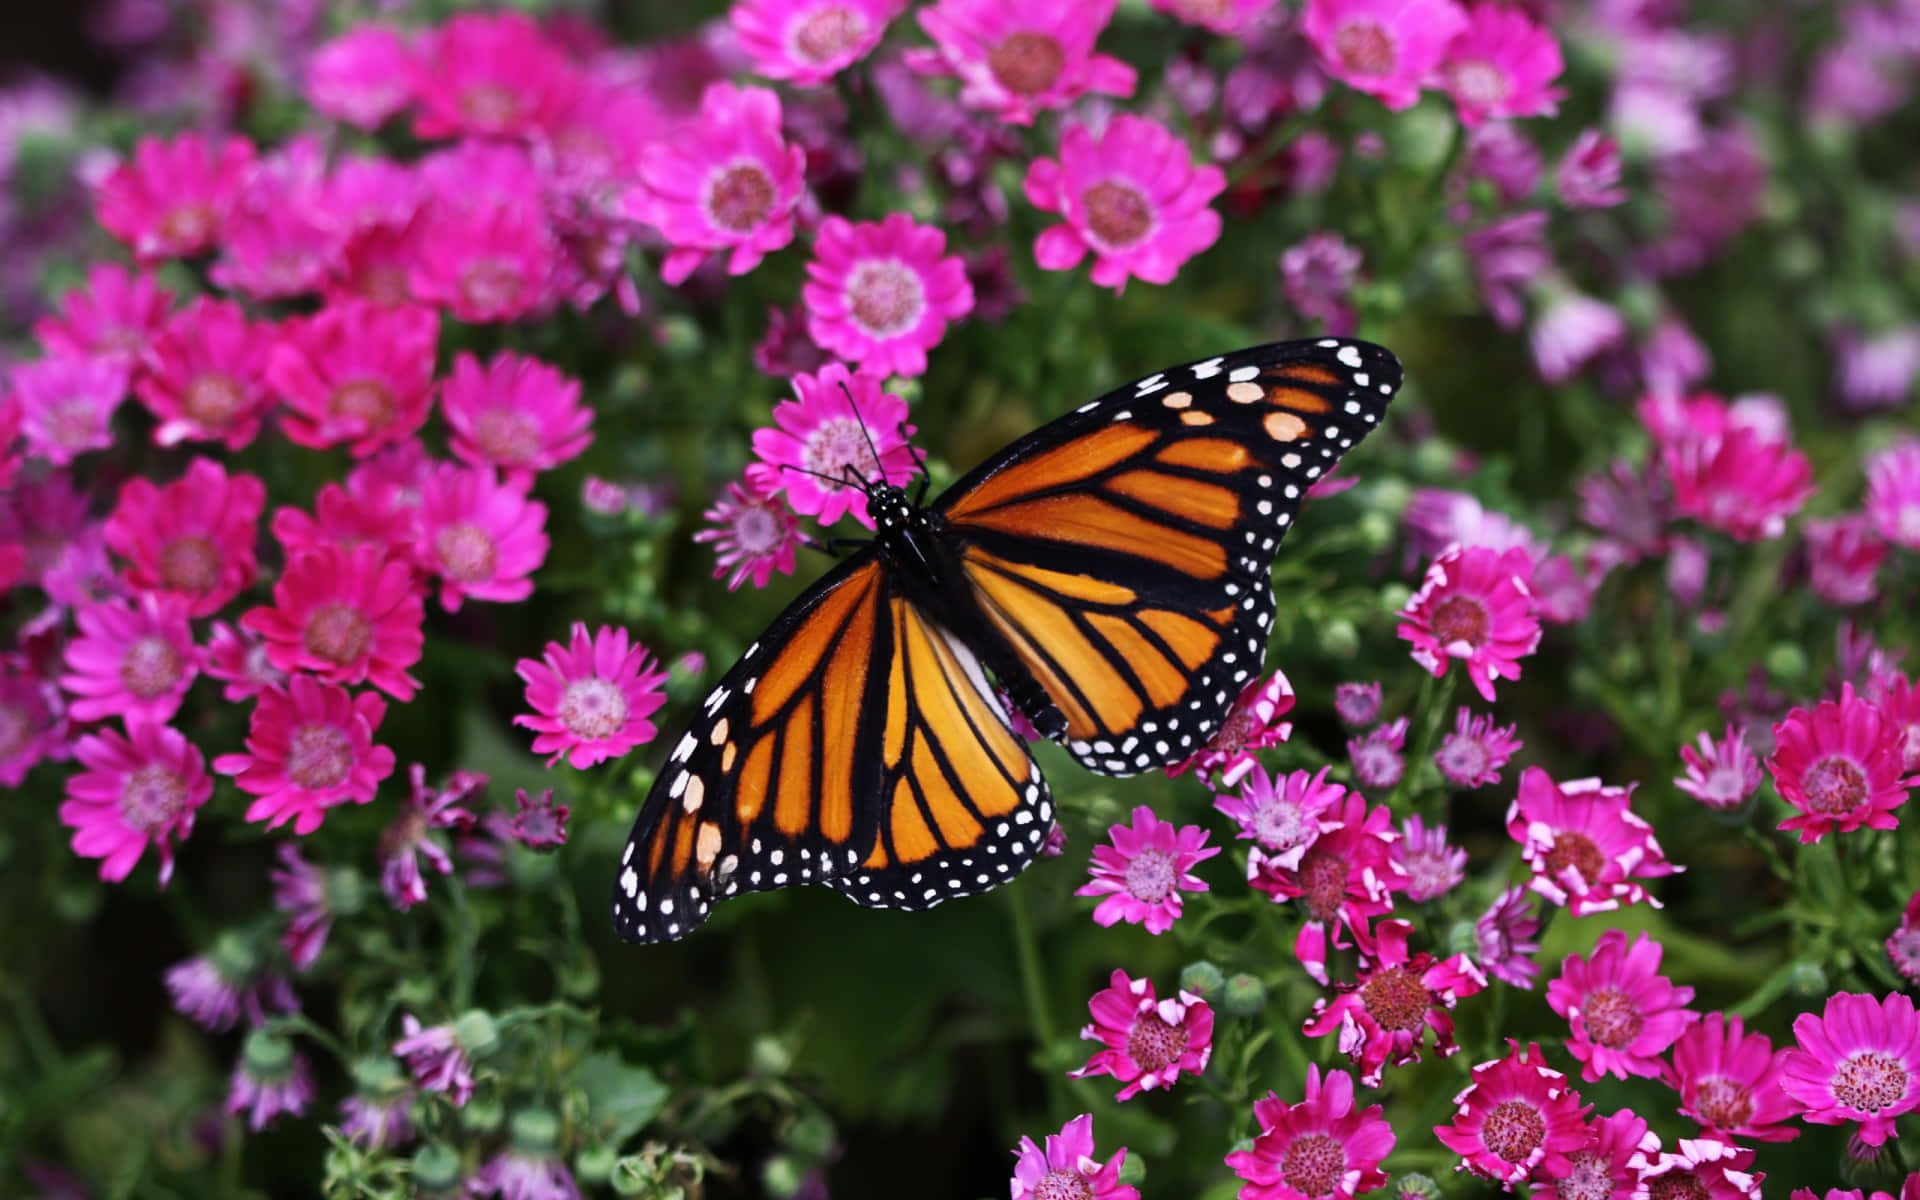 Experience the wonders of nature at Butterfly Zoo Wallpaper